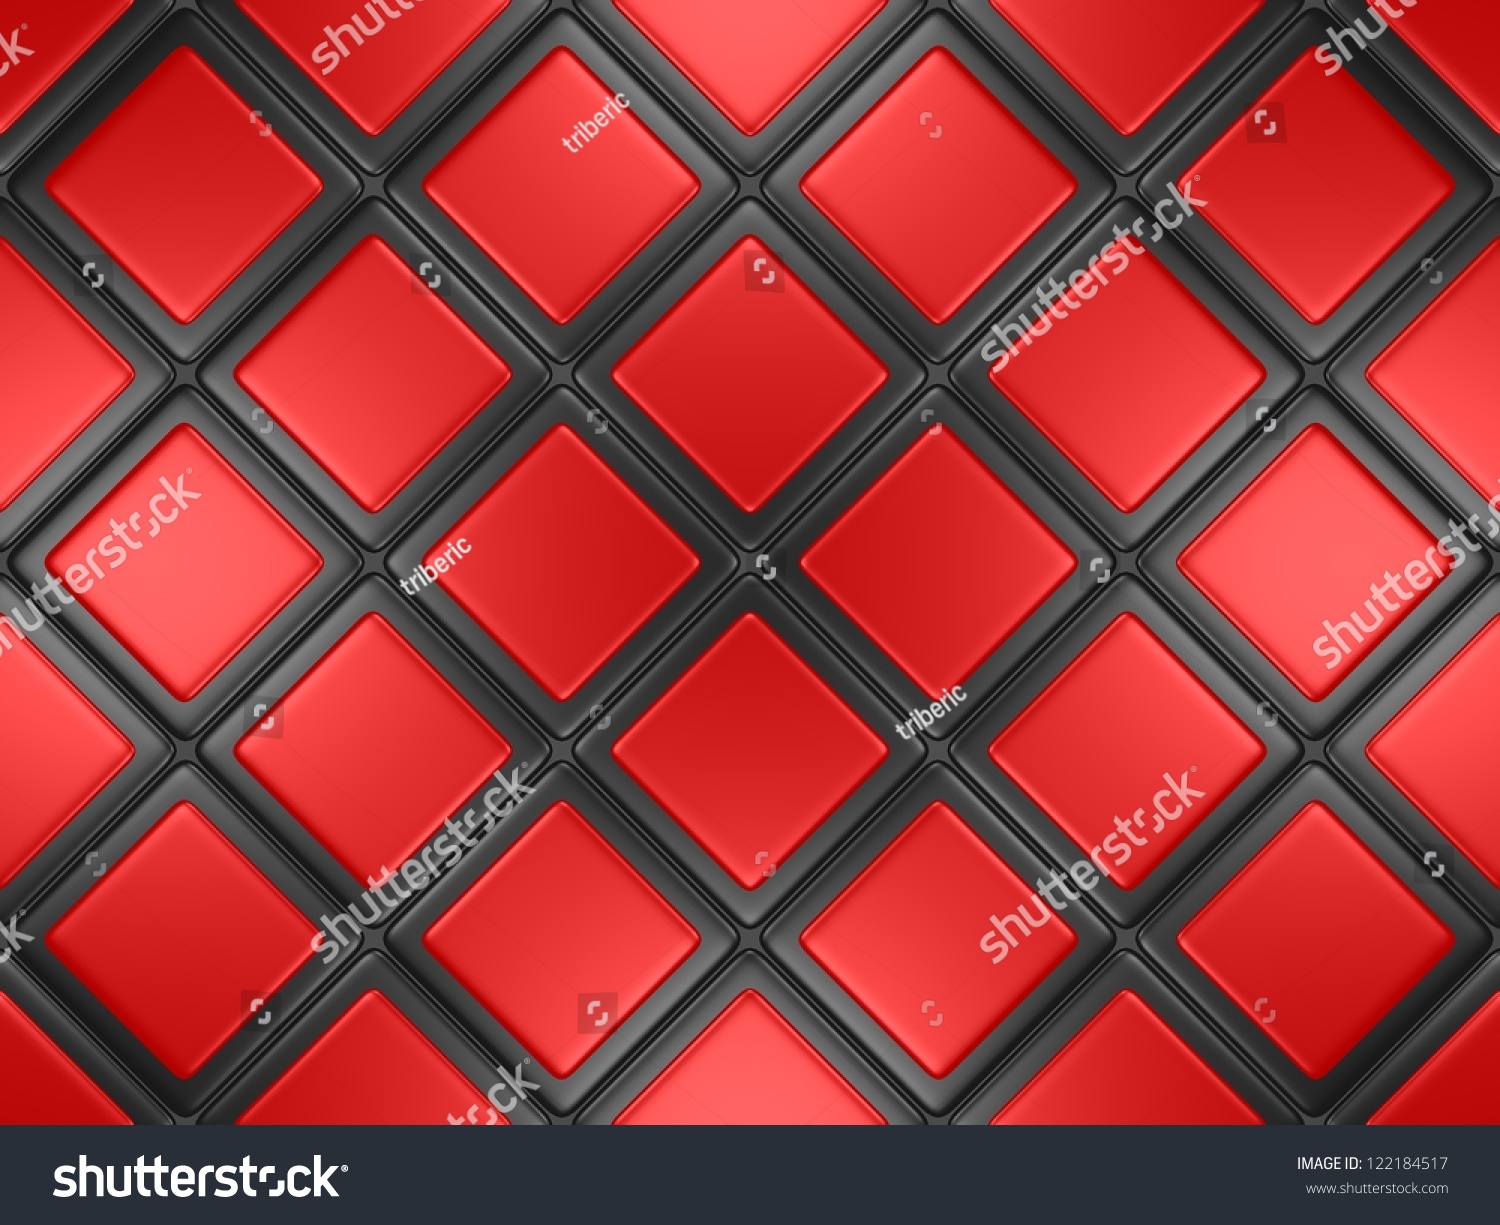 Mosaic With Red And Black Tiles Stock Photo 122184517 : Shutterstock